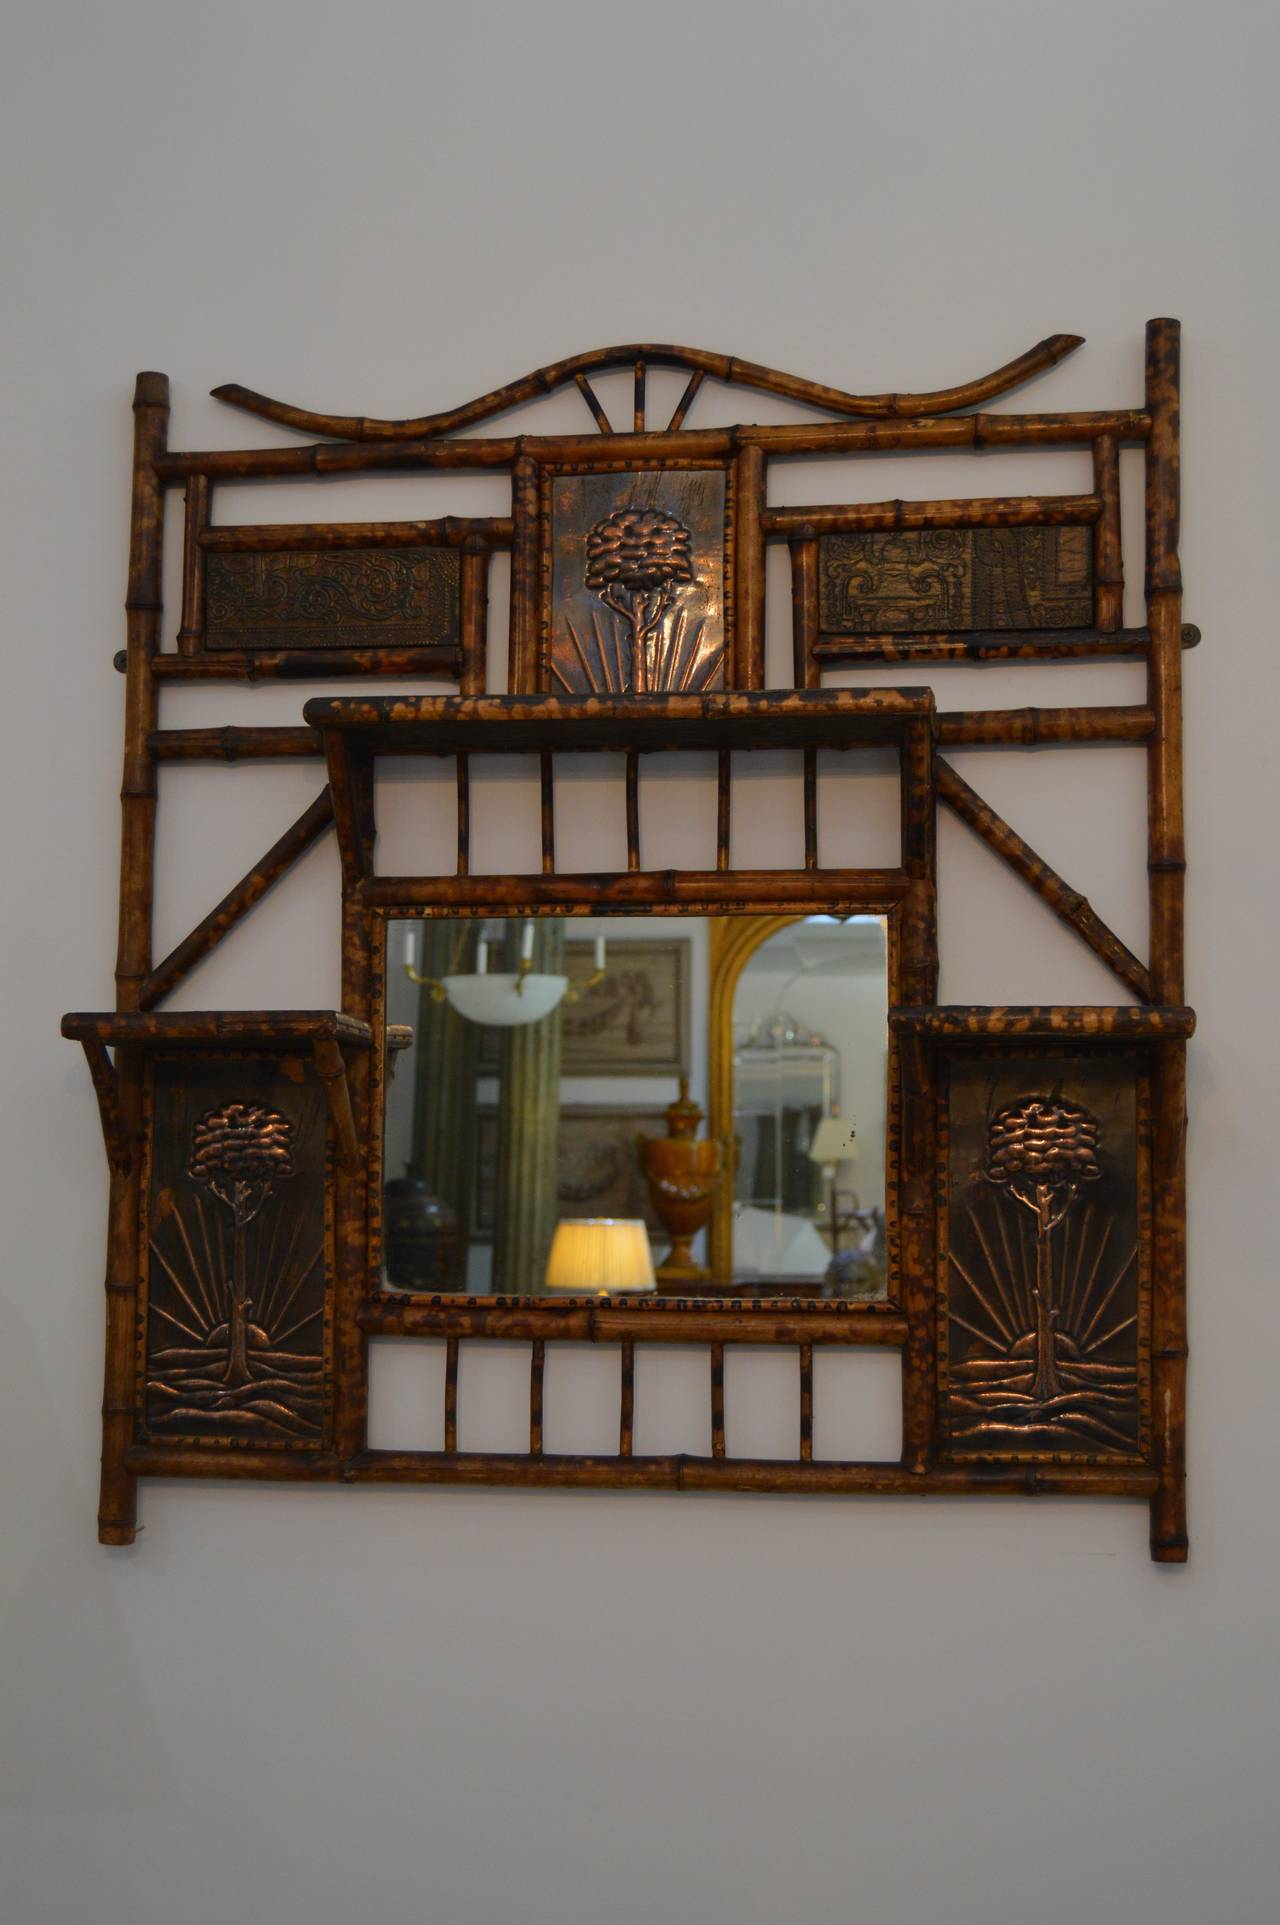 Exquisite early Victorian English bamboo mirror and shelf with beautiful copper decorative accents. This mirror measures 36.75 inches high by 32.75 inches wide. 

Please feel free to contact us directly for a shipping quote, or other questions and